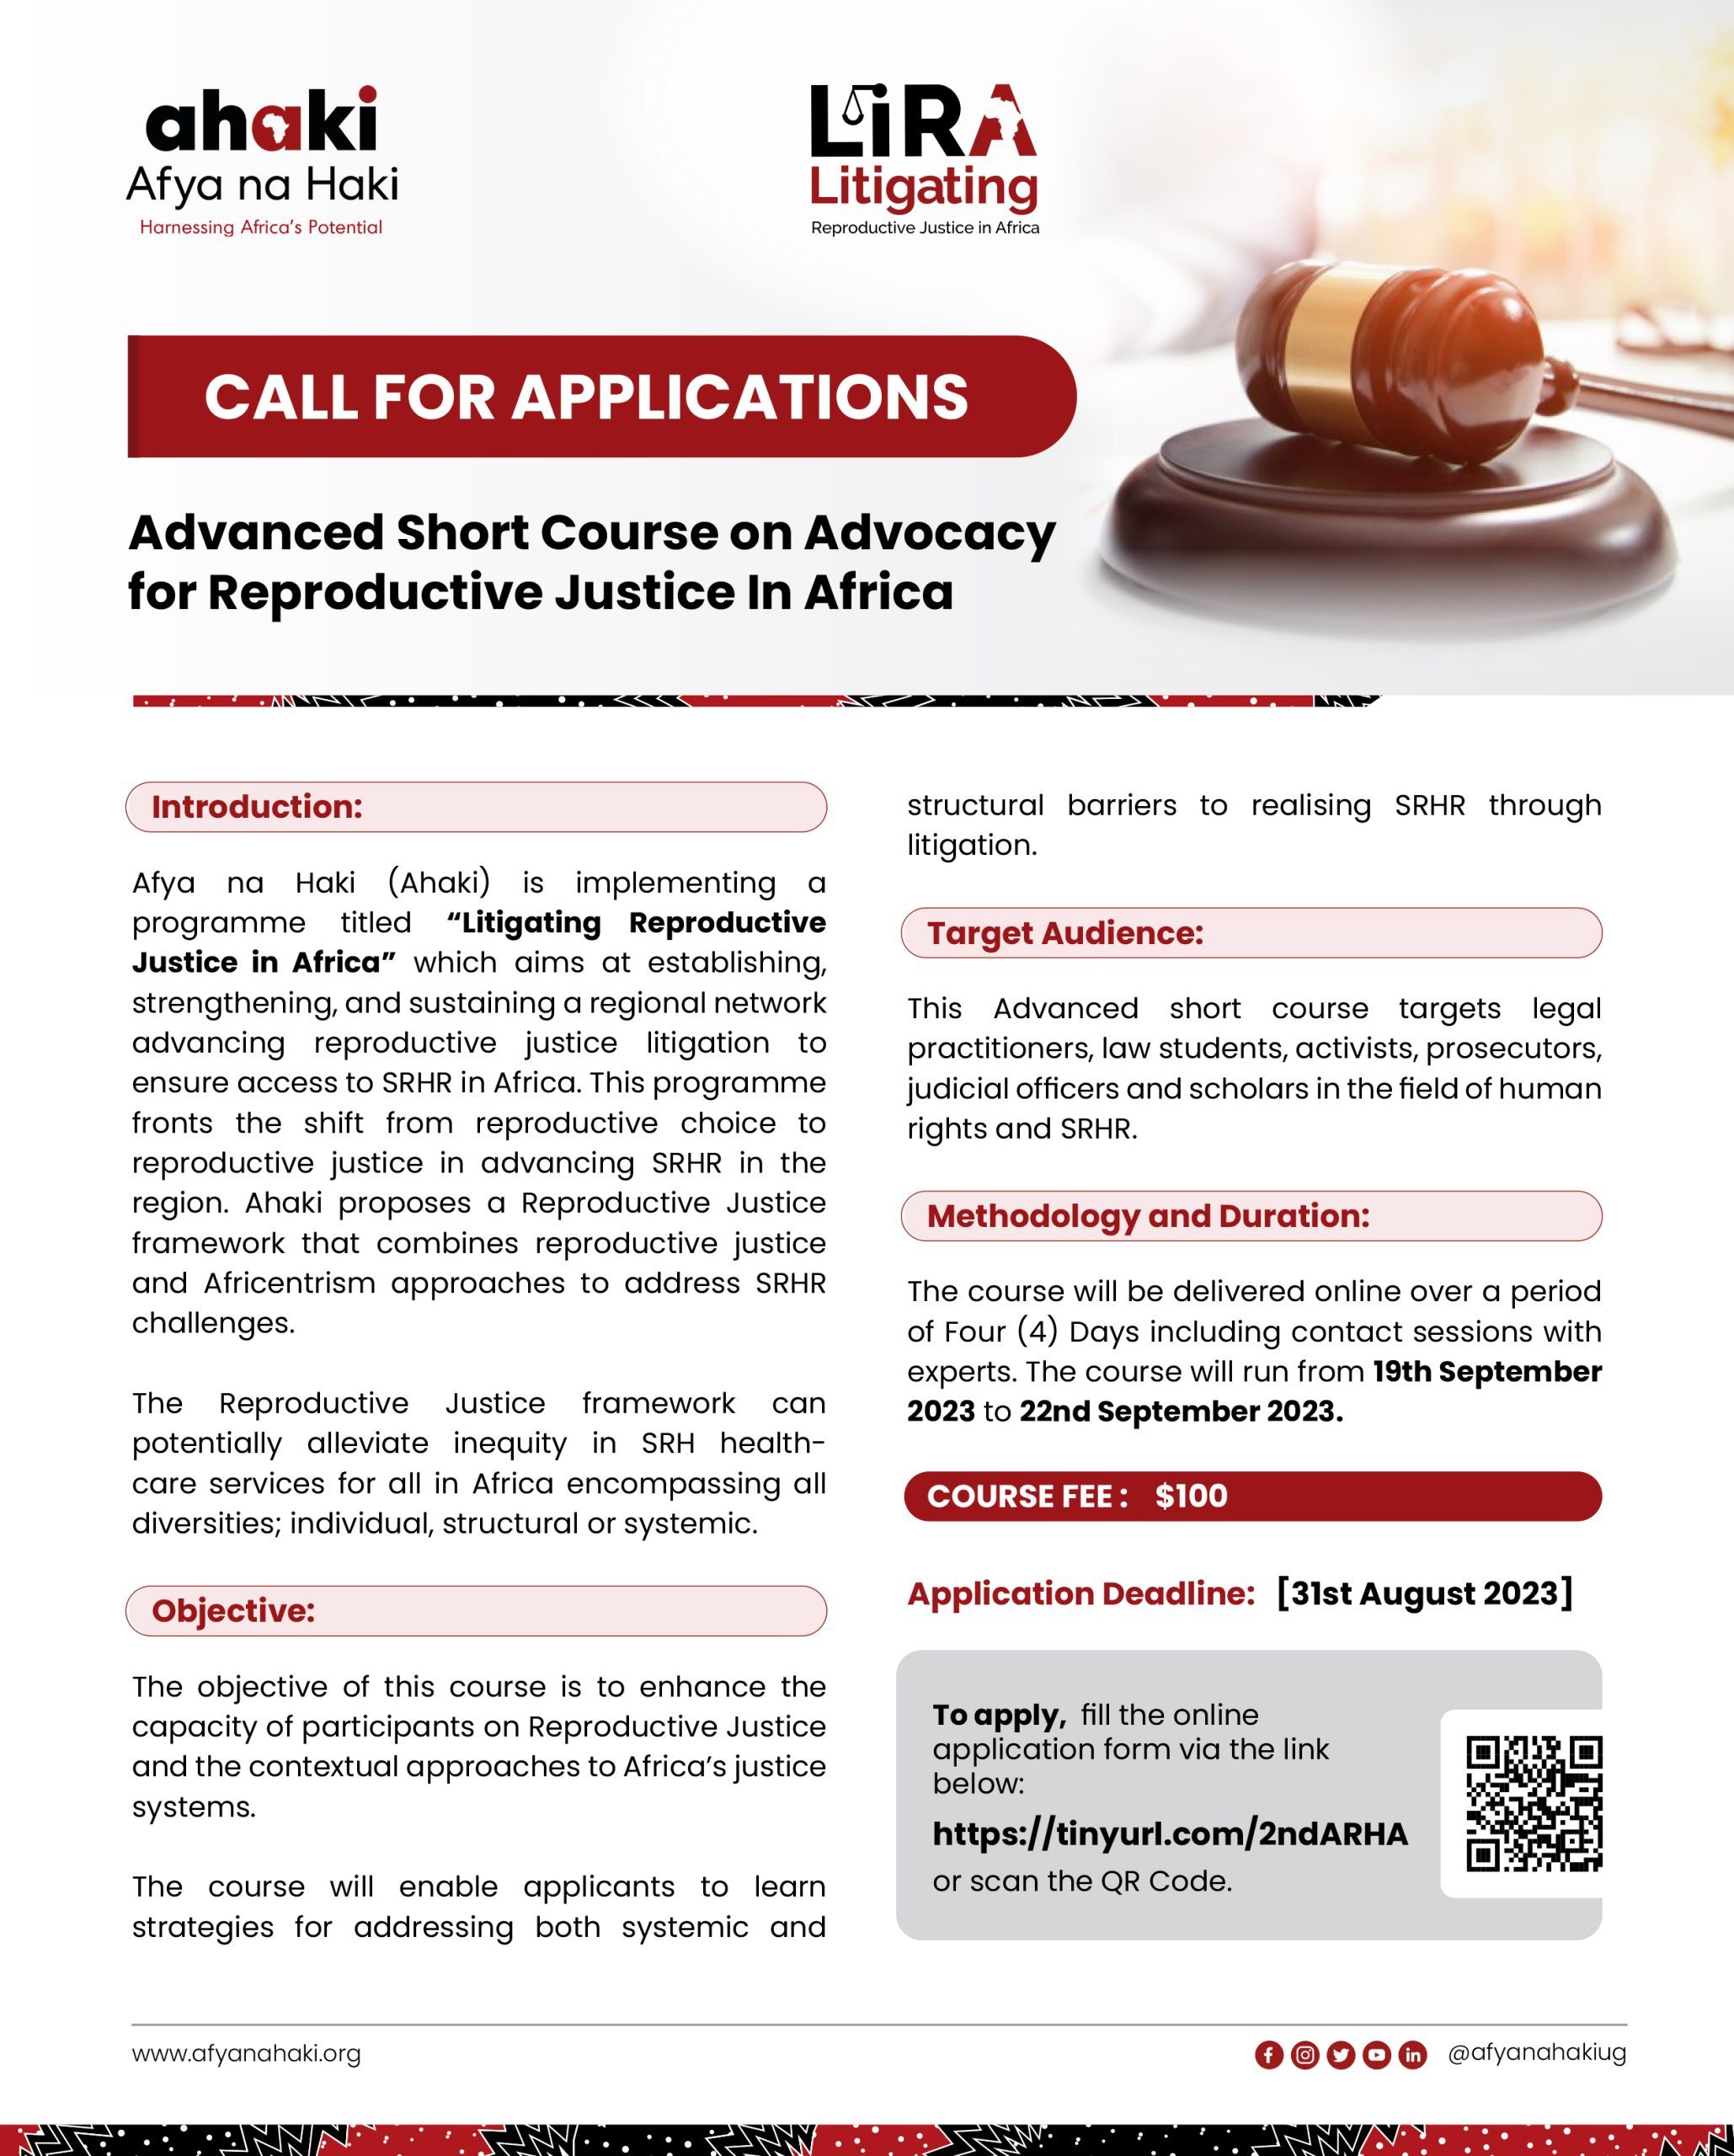 CALL FOR APPLICATIONS FOR ADVANCED SHORT COURSE ON REPRODUCTIVE JUSTICE IN AFRICA 2